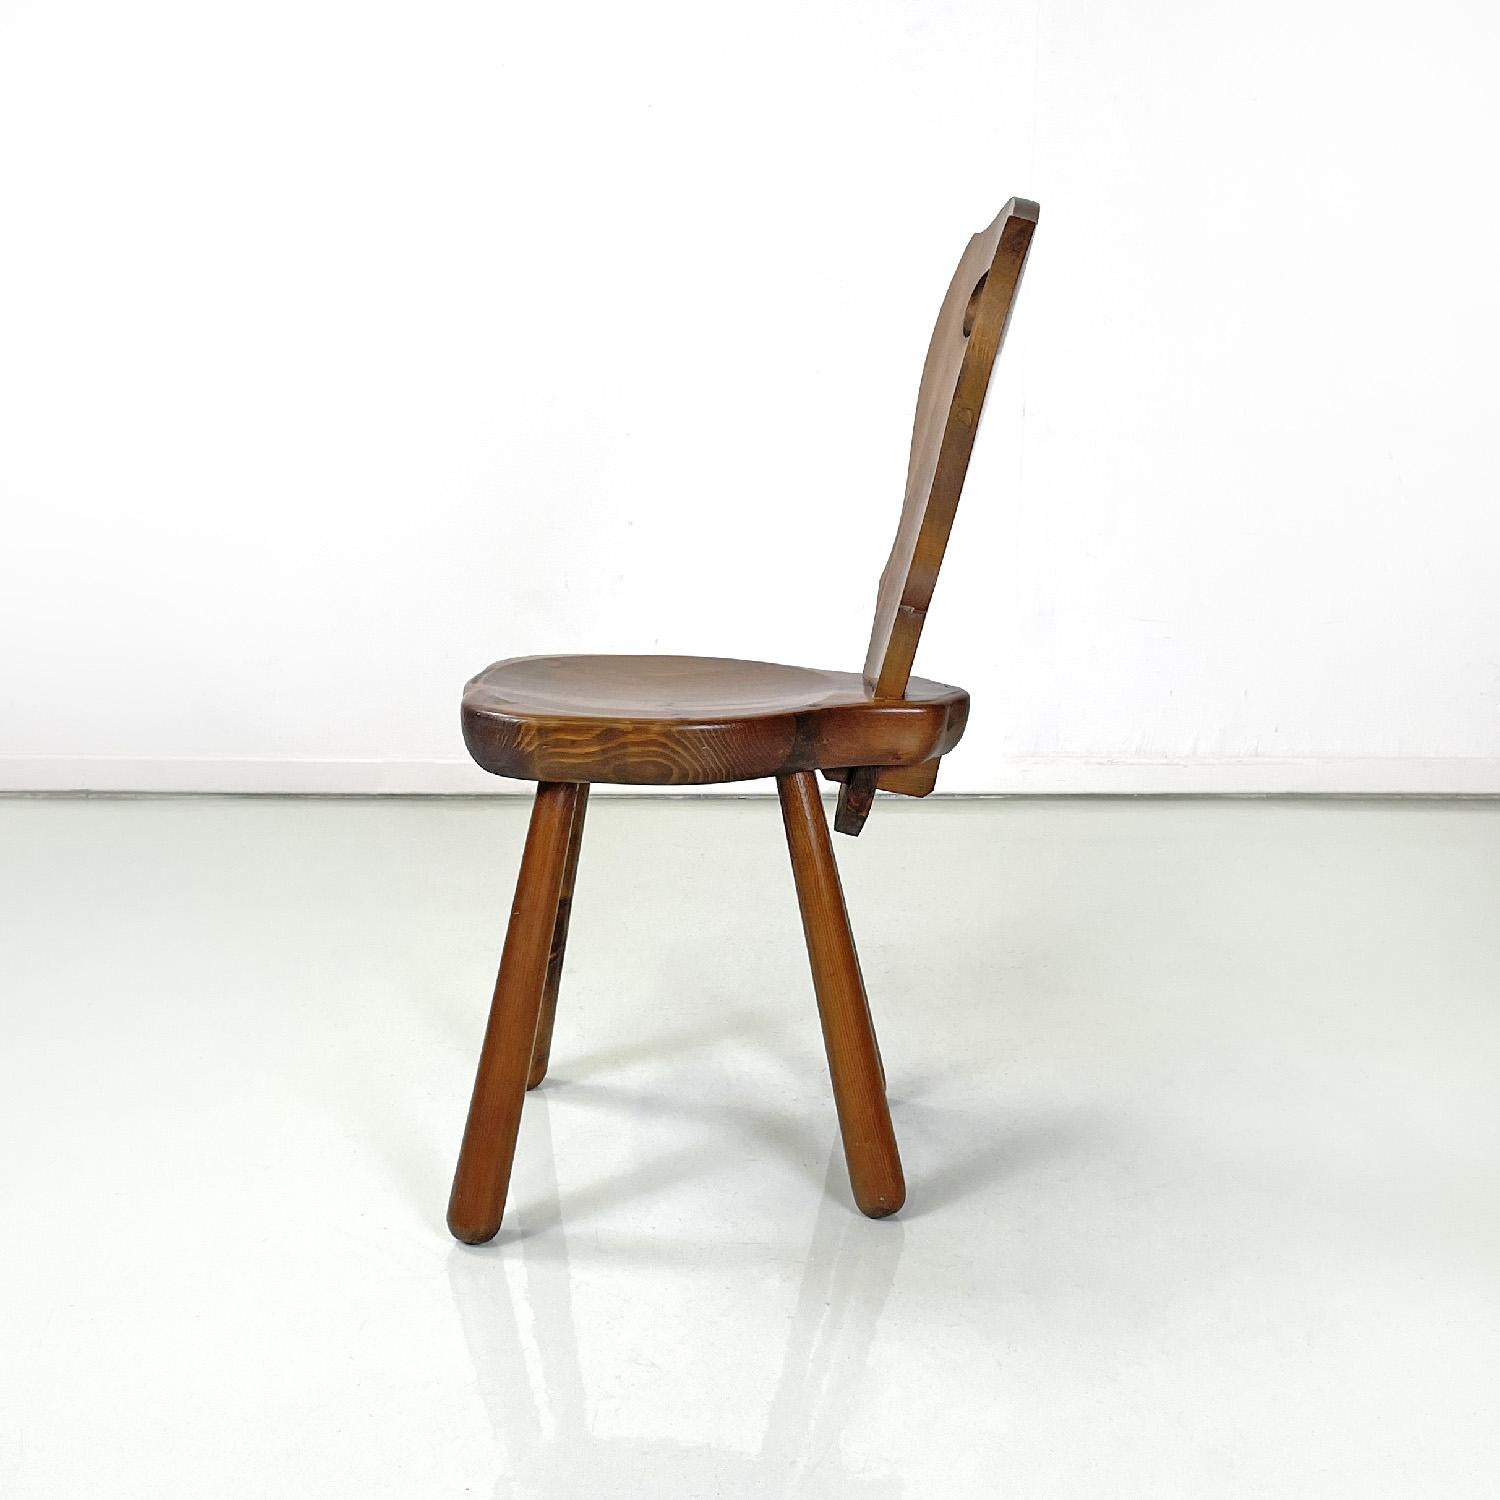 Mid-20th Century Italian Art Deco wooden chair with rounded profiles, 1940s For Sale